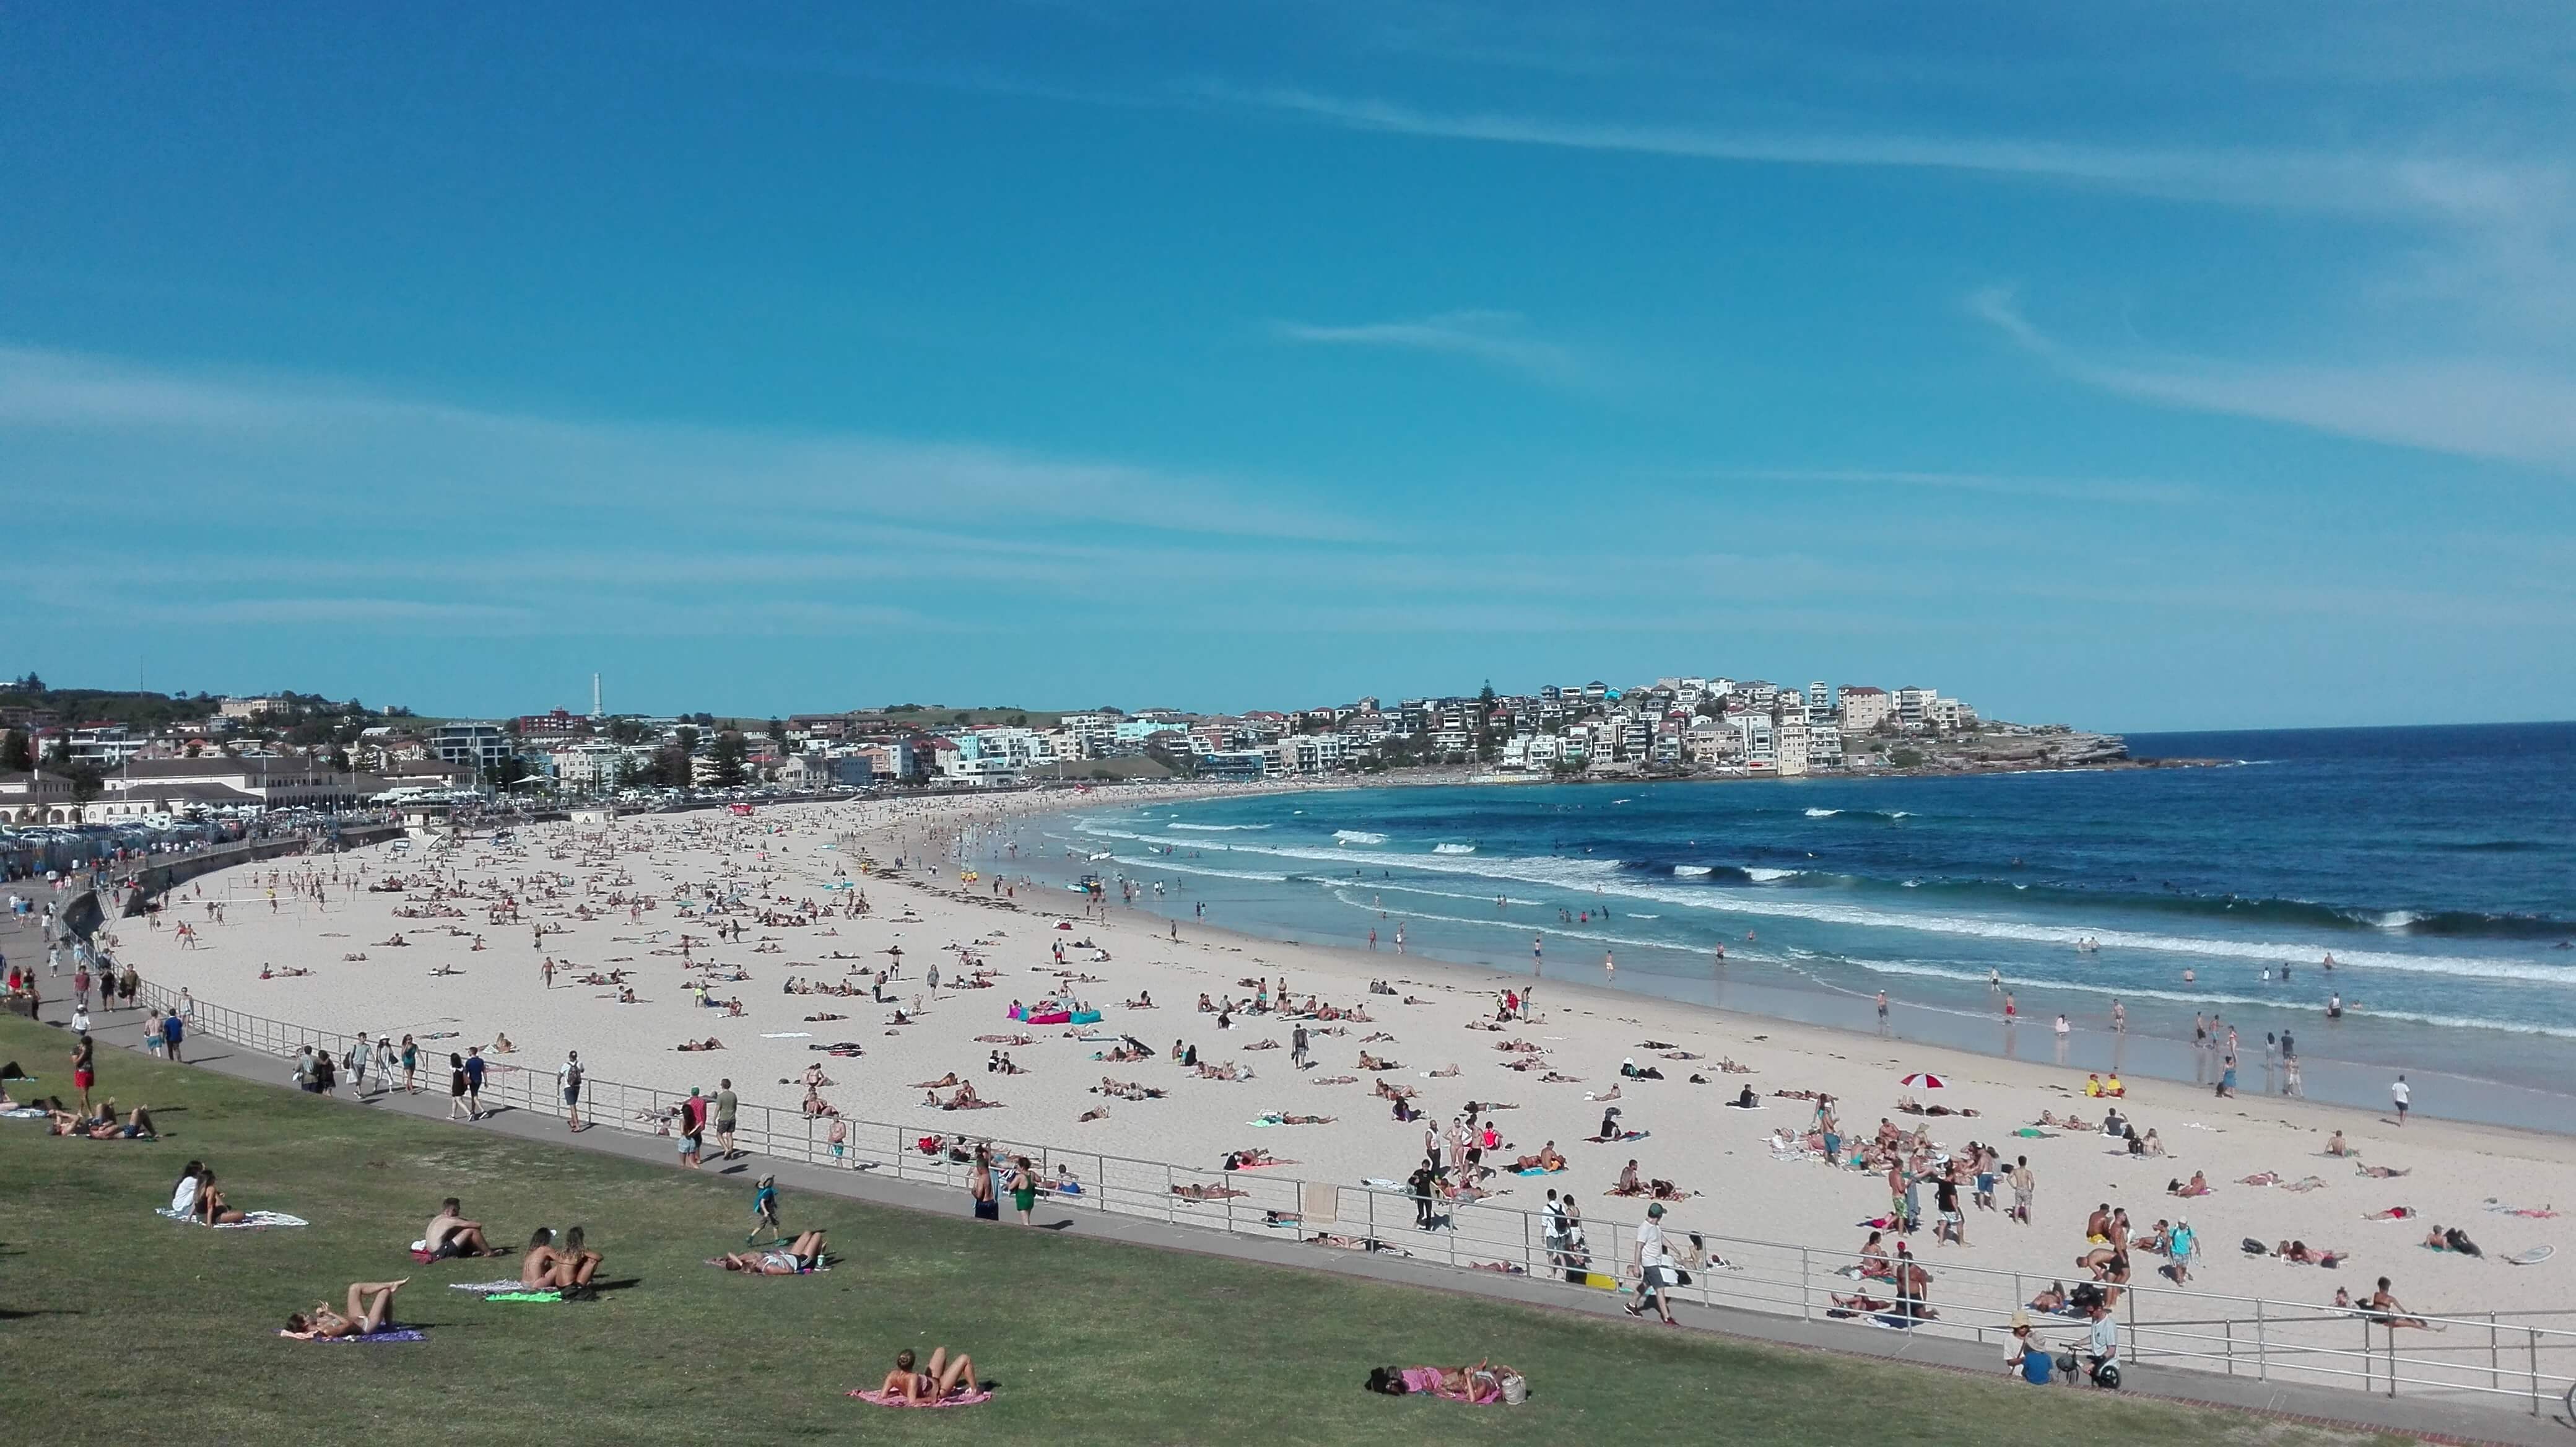 On a nice sunny day Bondi beach is full of people - tourists and locals.